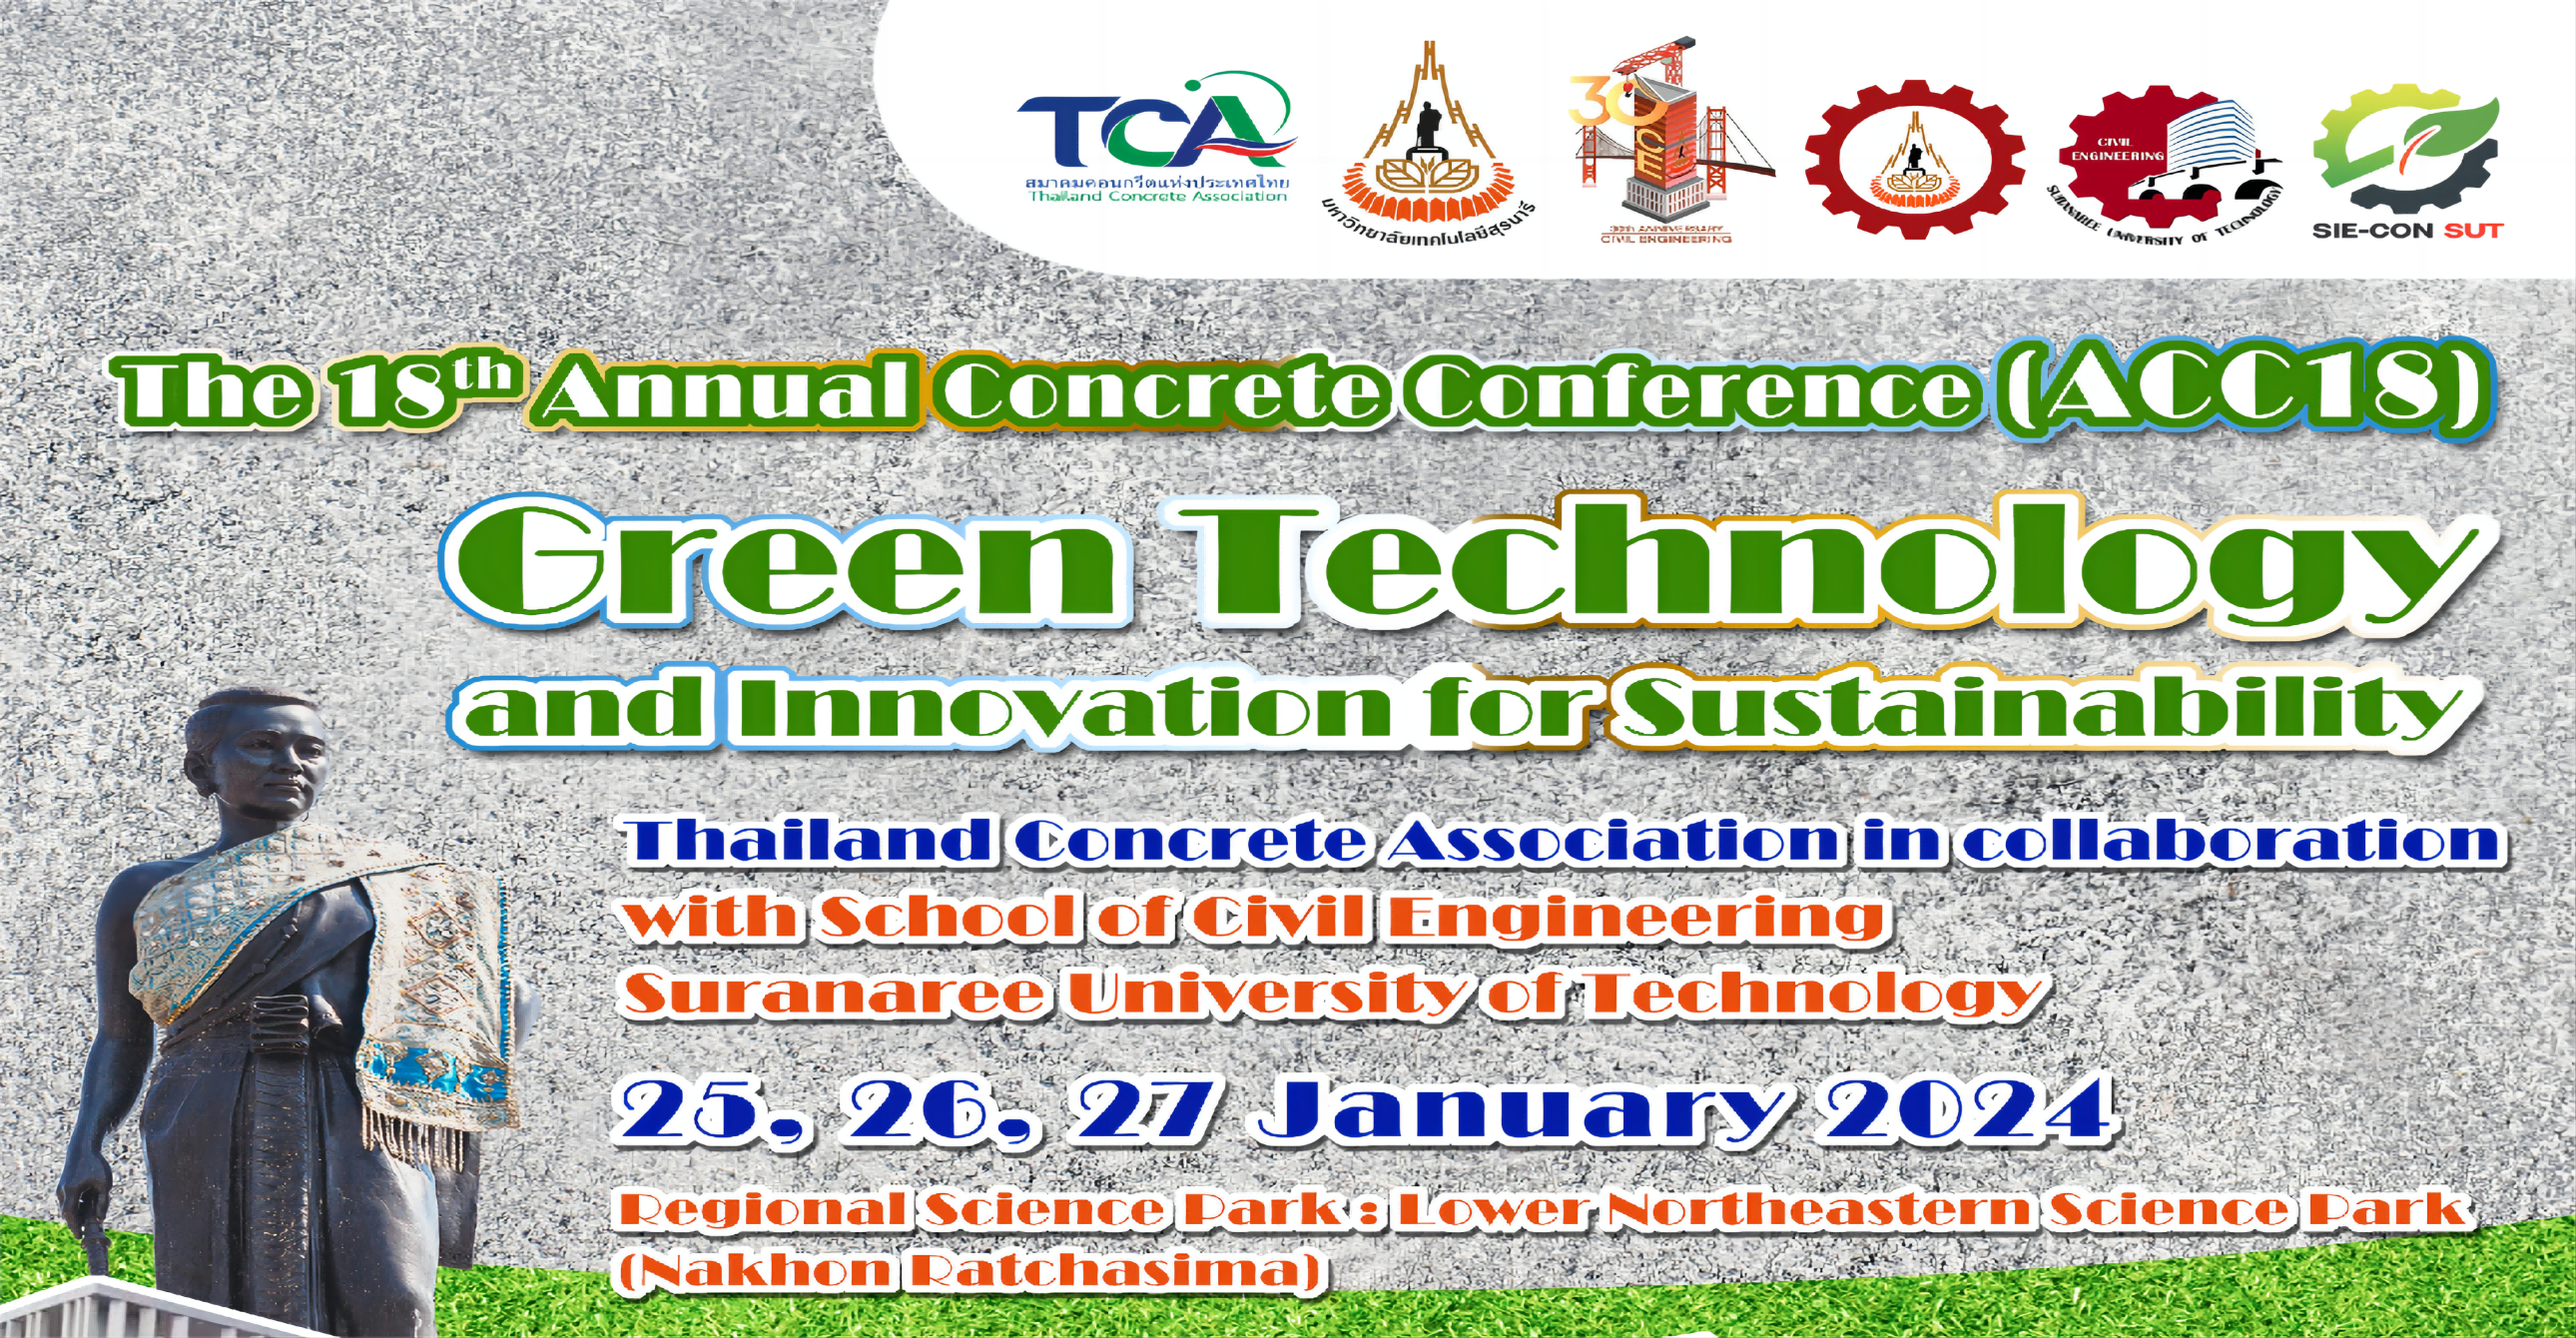 Let’s meet in  ACC18 in January 25-27 in Thailand.